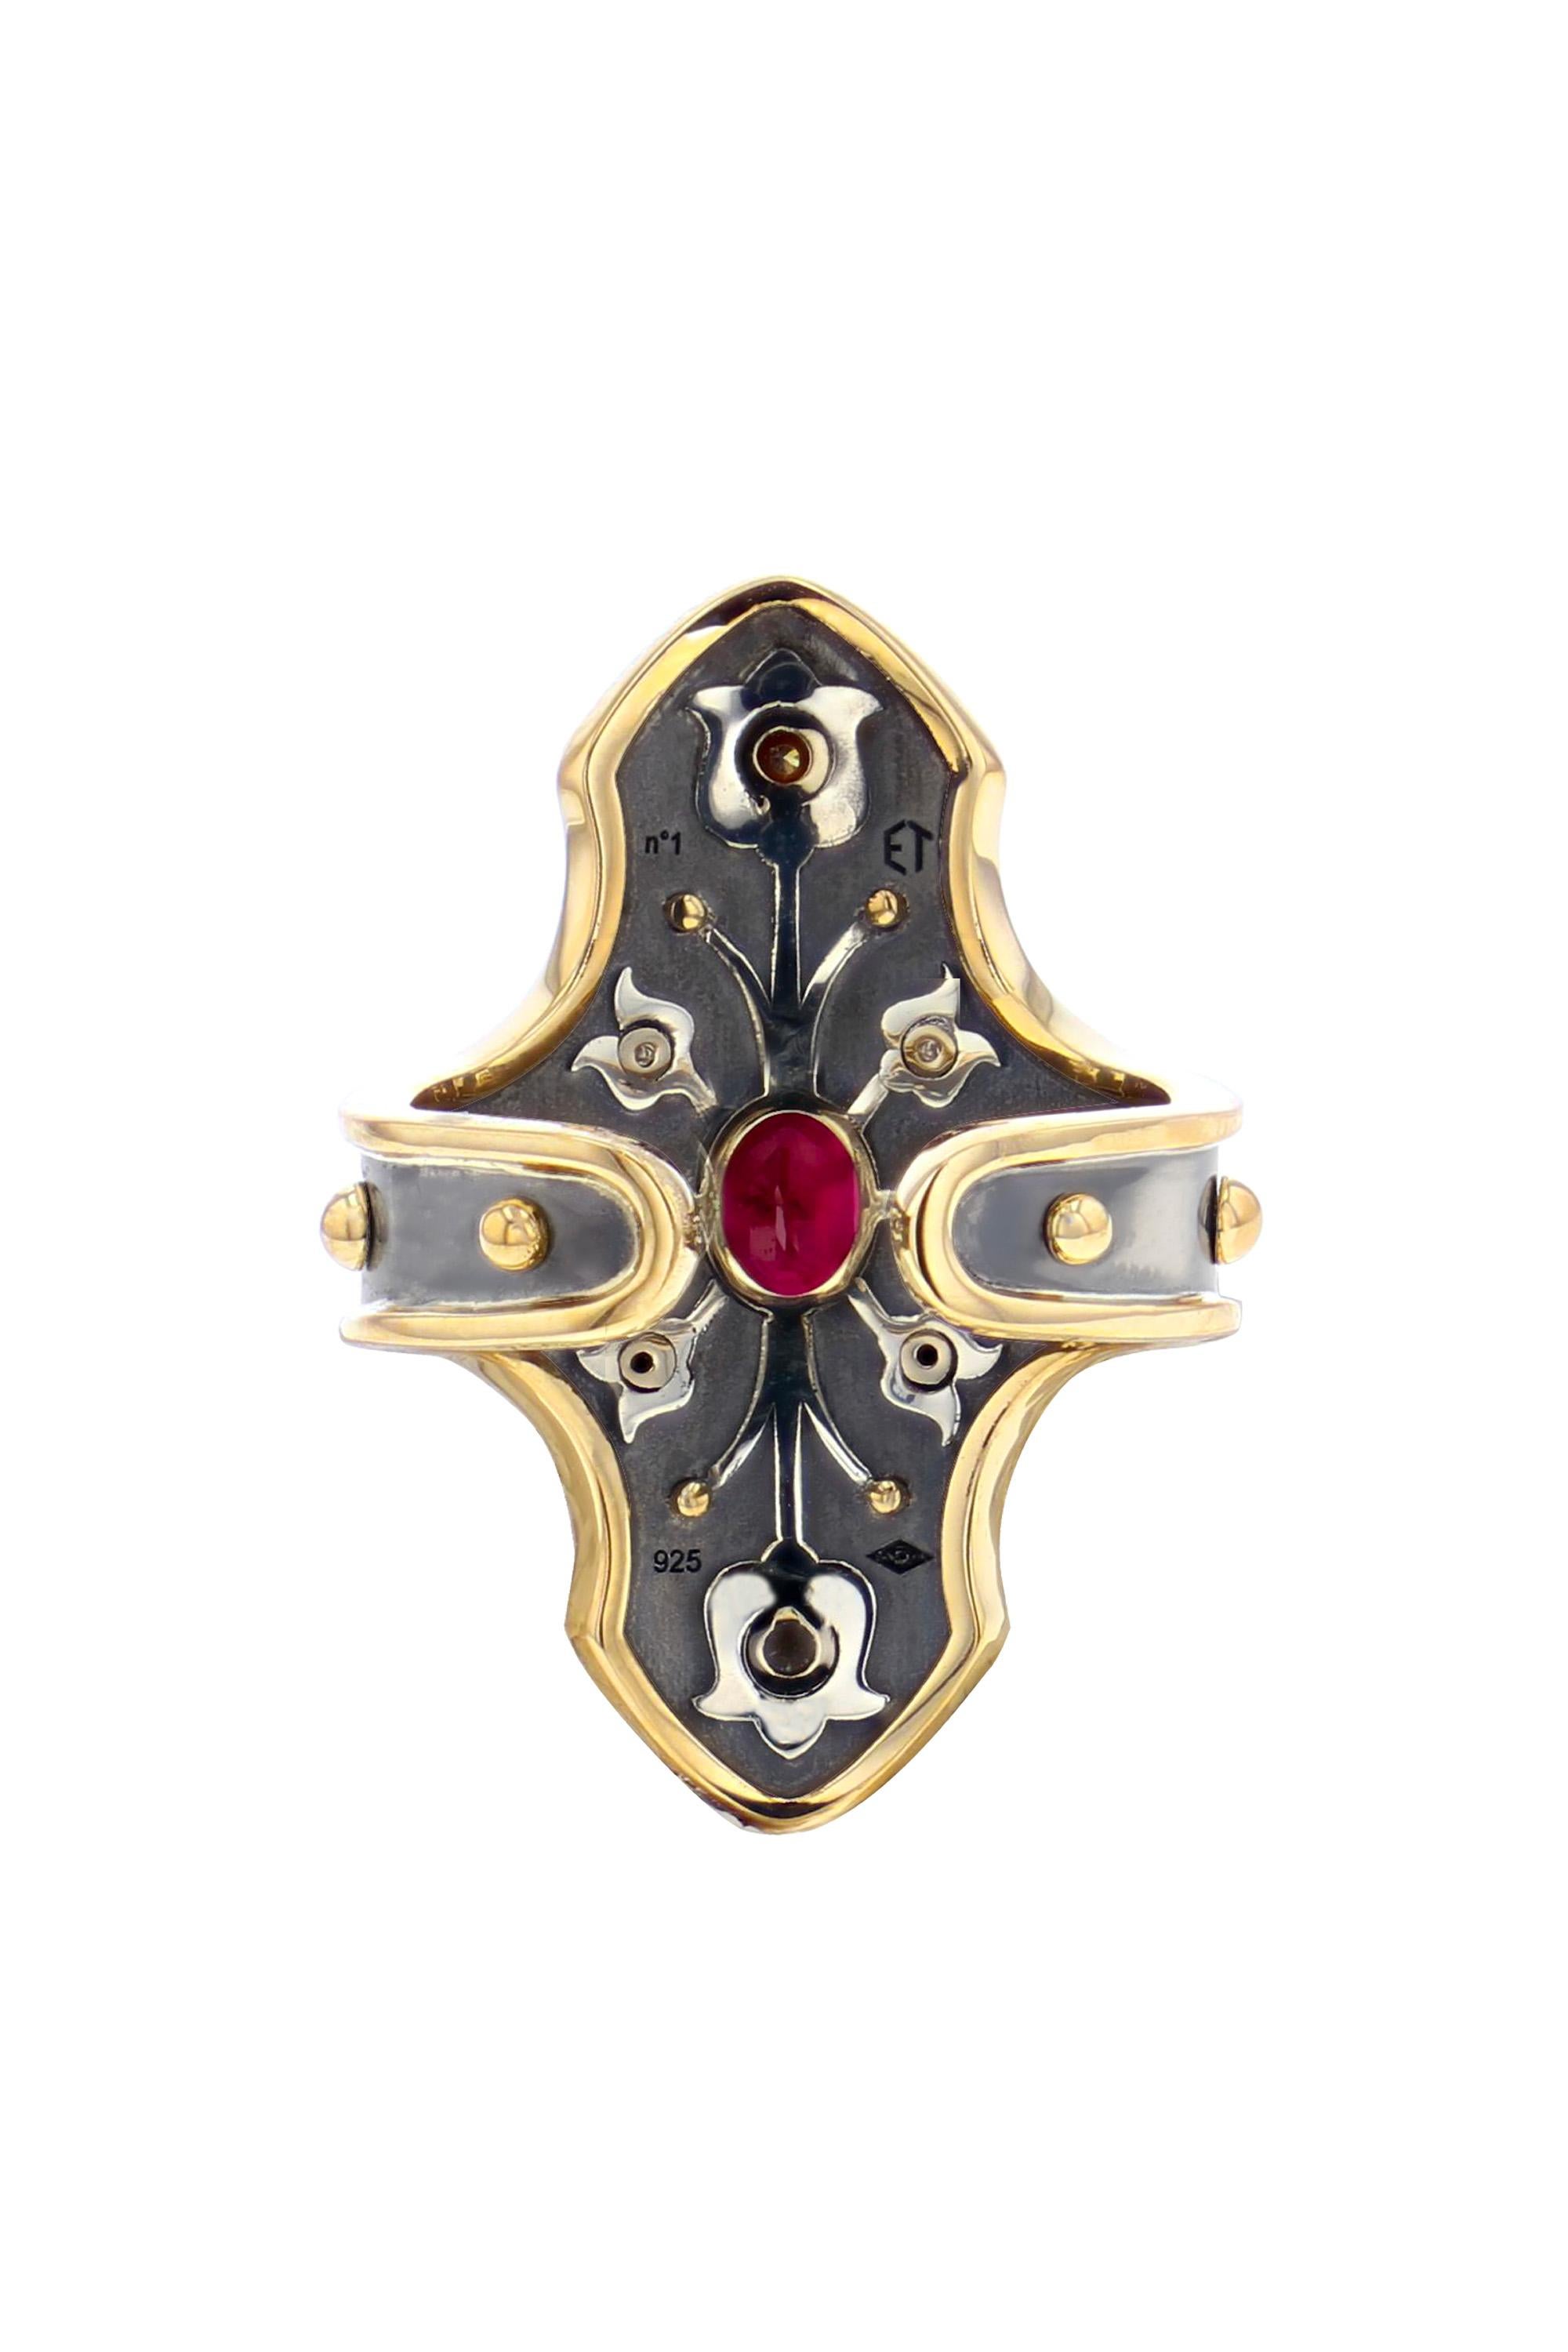 Neoclassical Ruby & Diamond Heaume Ring in 18k Yellow Gold by Elie Top For Sale